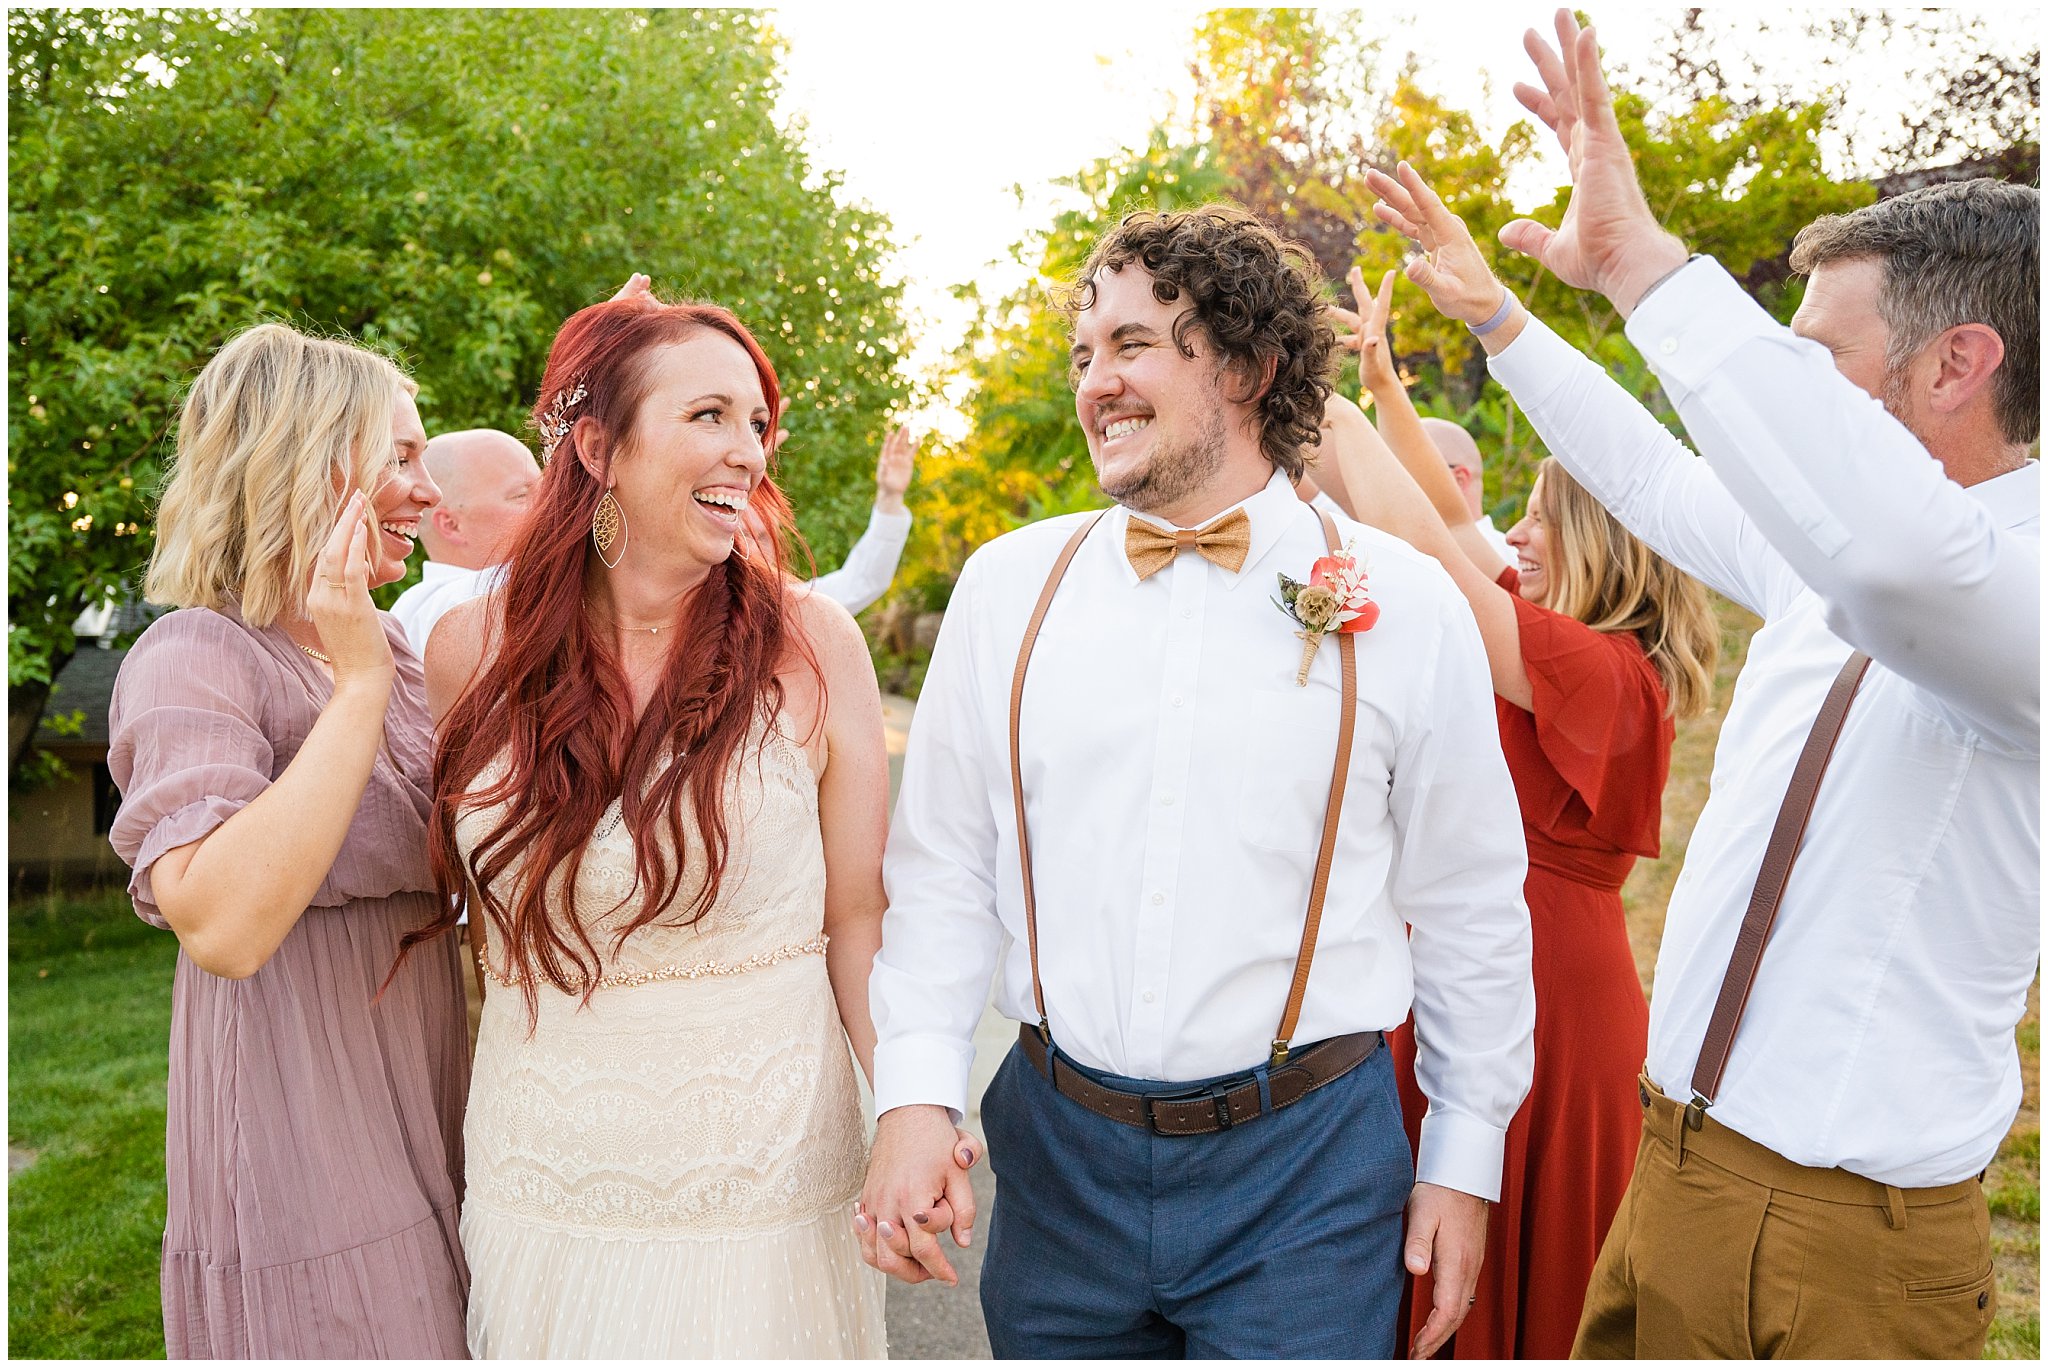 Wedding party with boho fall colors and long dresses and bowties | Logan Utah Outdoor Summer Wedding | Jessie and Dallin Photography